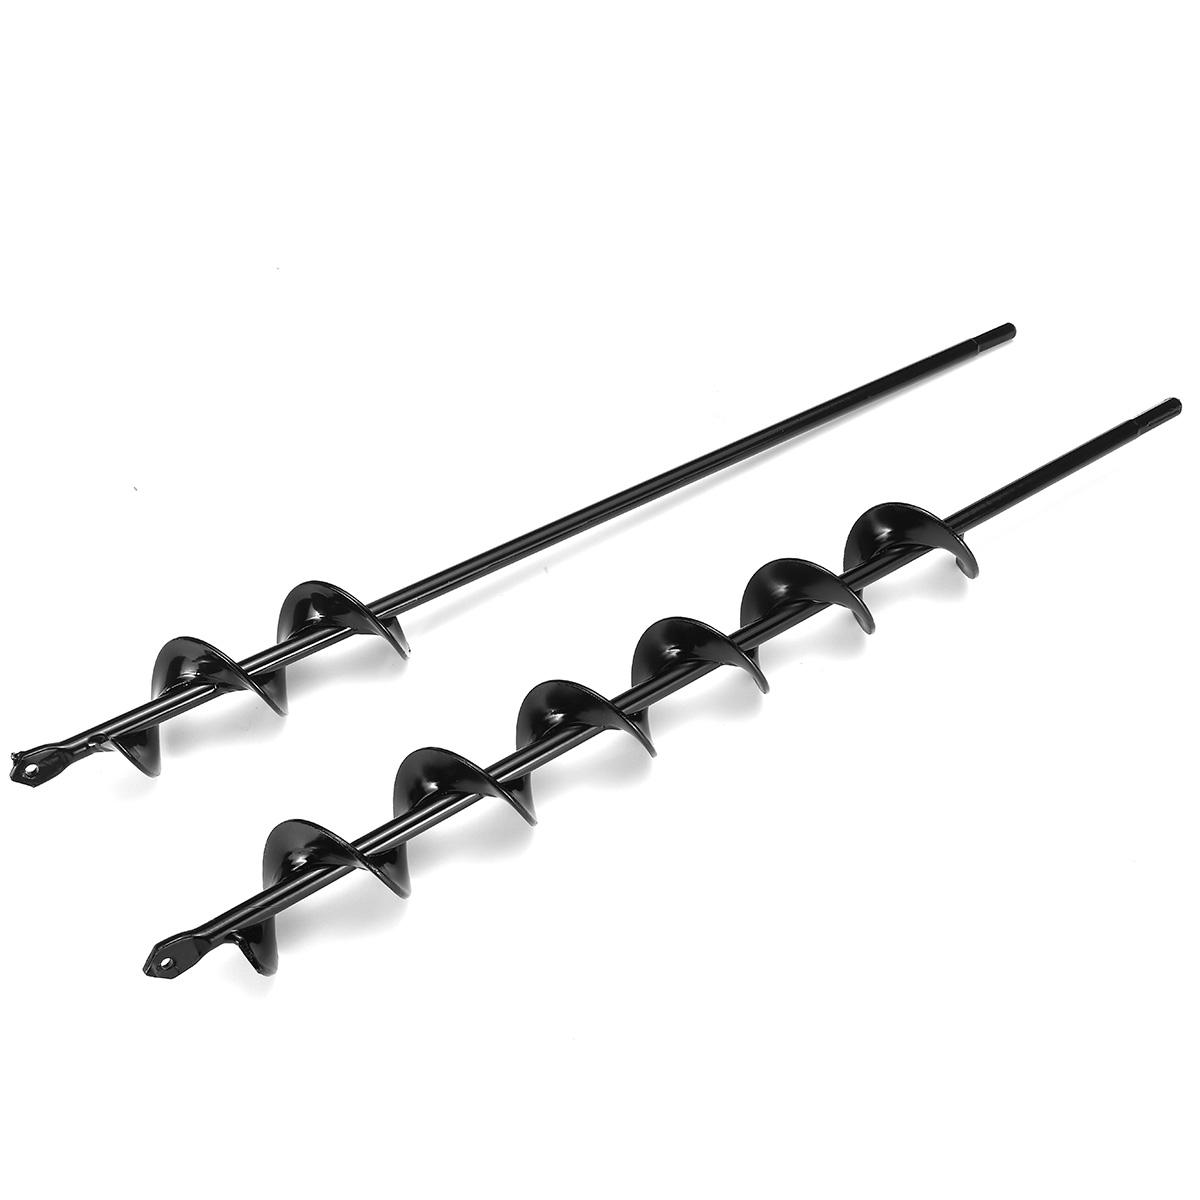 450x40mm Yard Earth Irrigating Planting Auger Drill Bit graaft Hole for Bulb Plant